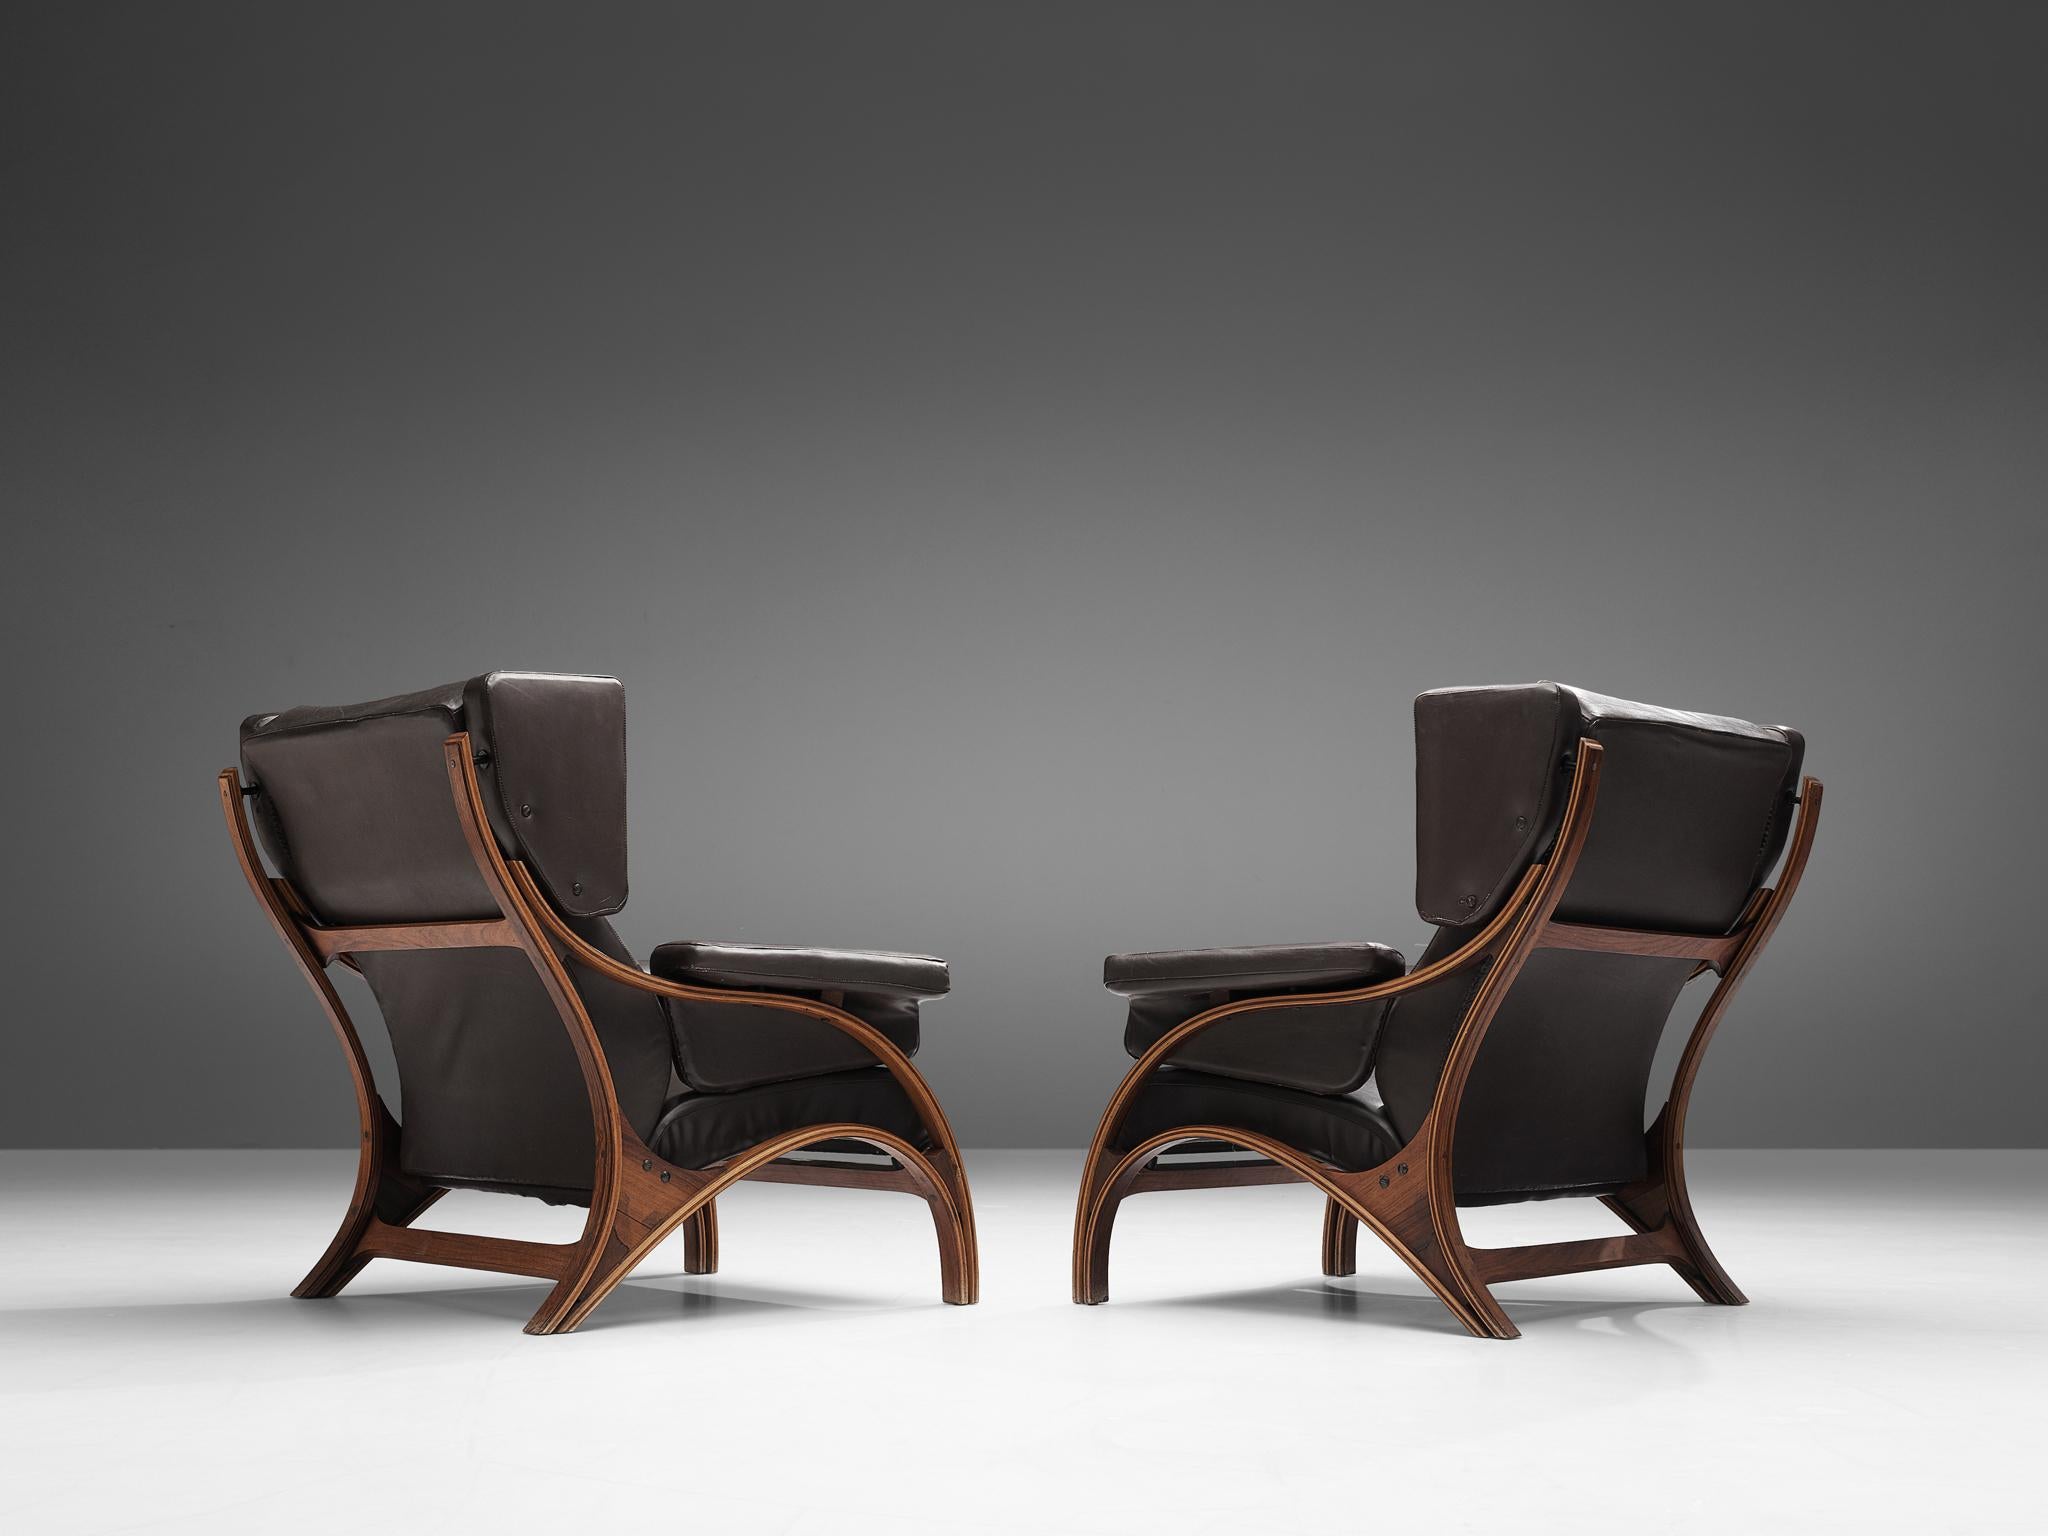 Giampiero Vitelli, pair of lounge chairs, plywood, wood, dark brown leather, Italy, 1960s

Pair of Italian wingback chairs that features curves and gracious forms by Giampiero Vitelli. The most interesting feature is the wooden frame with its fluid